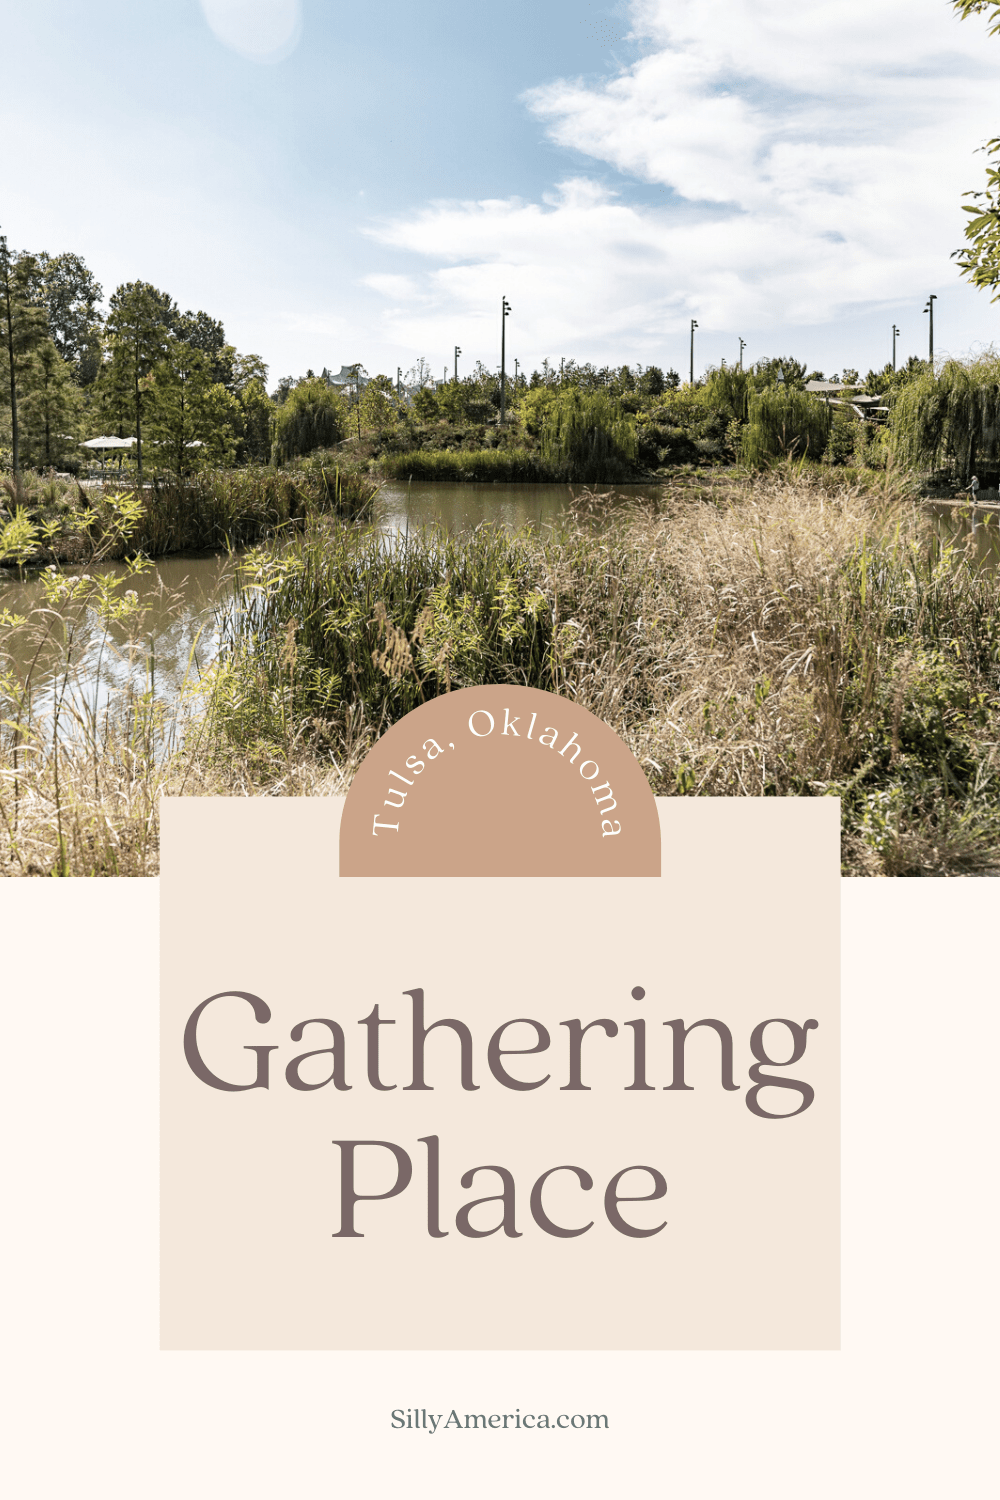 The Gathering Place opened in Tulsa on September 8, 2018 as a place for as a "vibrant and inclusive space, where diverse communities could come together to explore, learn and play."  Enjoy nature walks, bird watching, scavenger hunts, sports, skateboarding, and running. There are adventurous playgrounds, public art, restaurants too.  #RoadTrips #RoadTripStop #Oklahoma #OklahomaRoadTrip #OklahomaRoadsideAttractions #RoadsideAttractions #RoadsideAttraction #RoadsideAmerica #RoadTrip